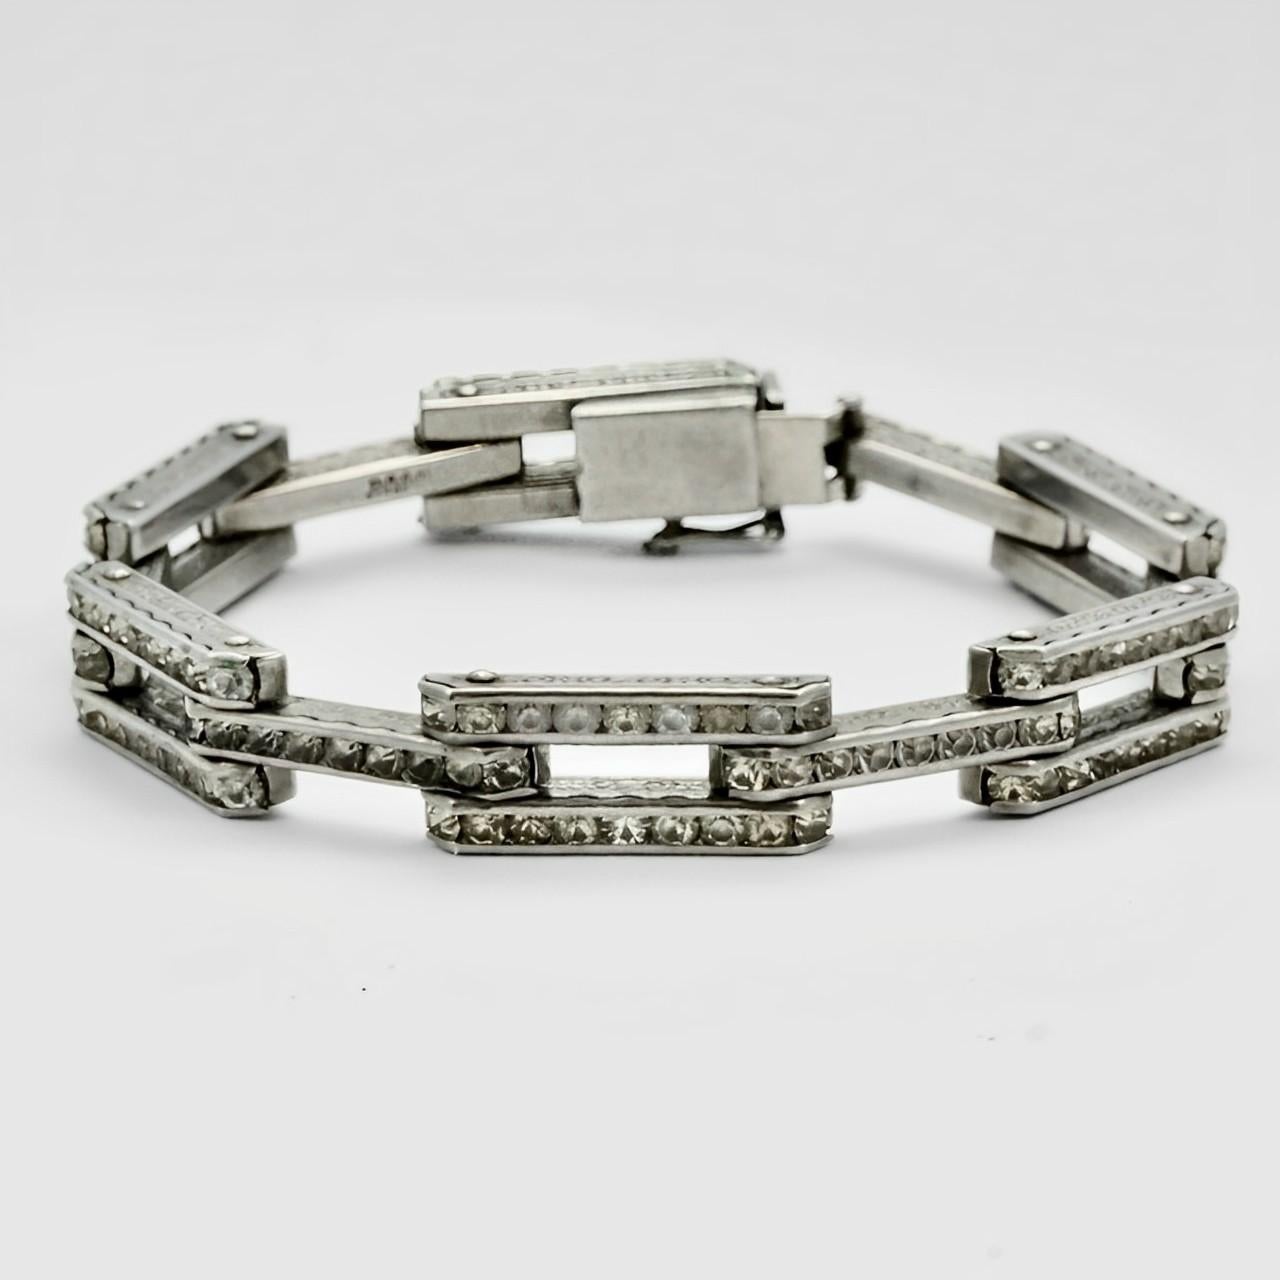 Schreiber & Hiller Art Deco DRGM Silver Tone Rhinestone Link Necklace Bracelet In Good Condition For Sale In London, GB